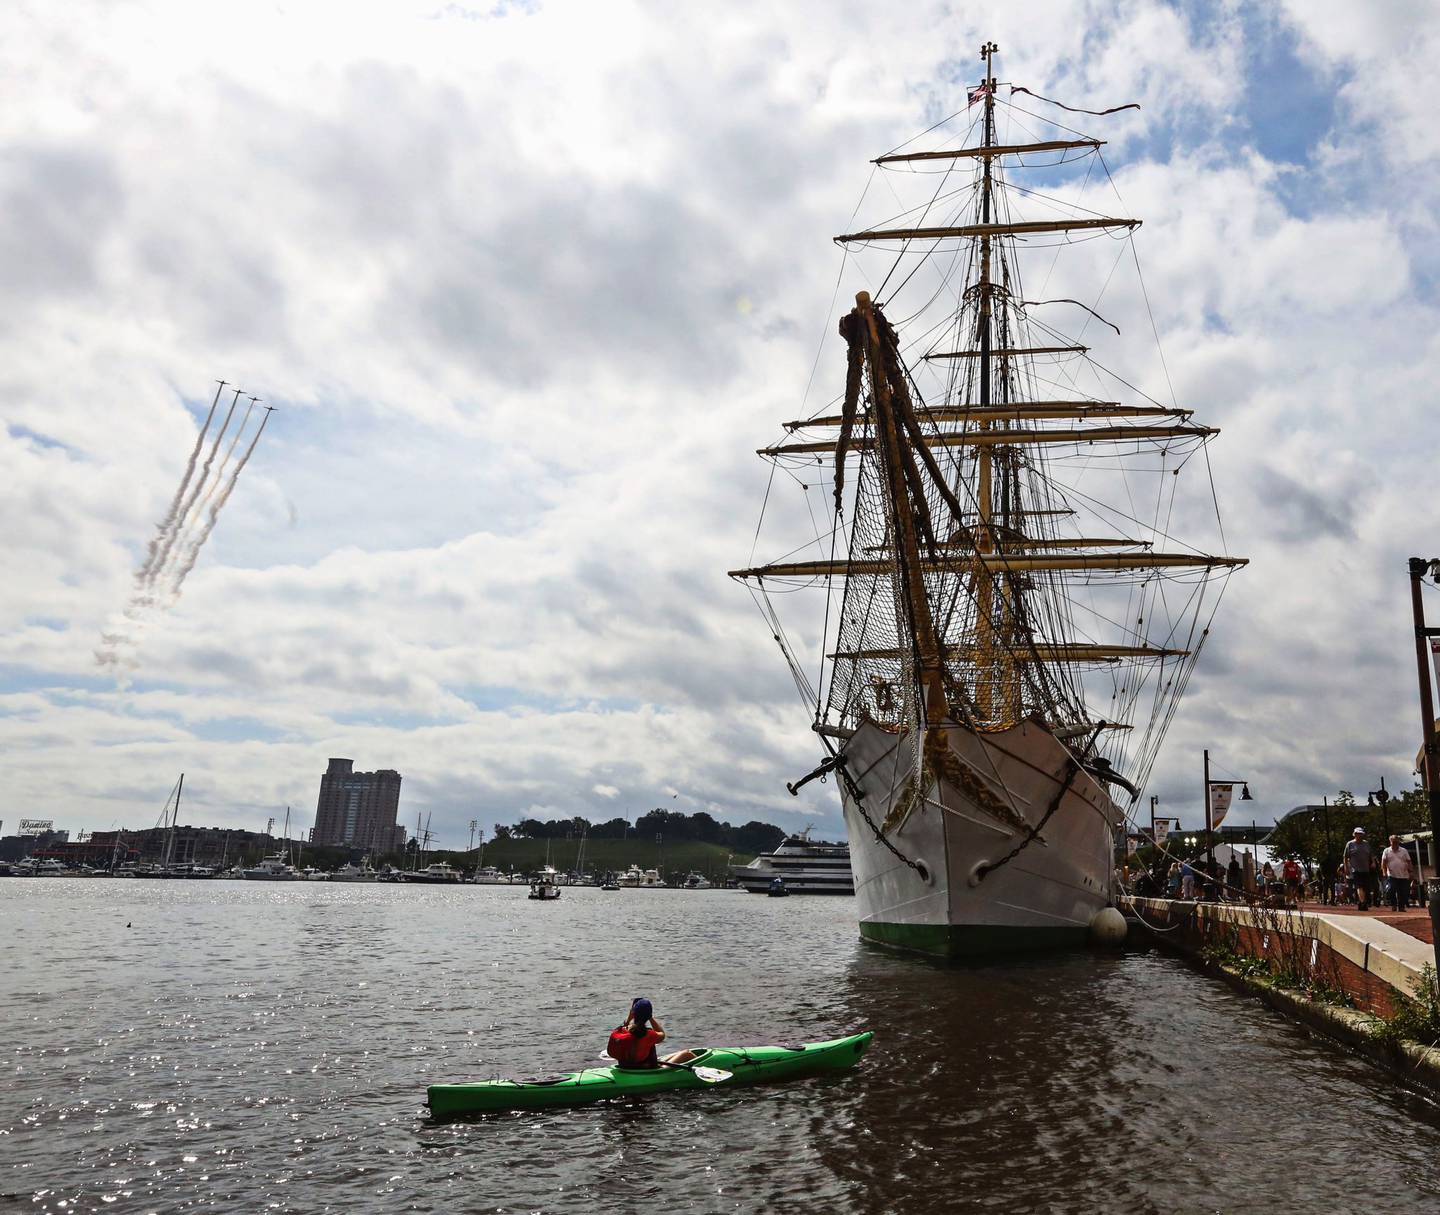 A kayaker takes a photo of the Danmark ship and flight demonstration happening during Baltimore’s FleetWeek at the Inner Harbor.